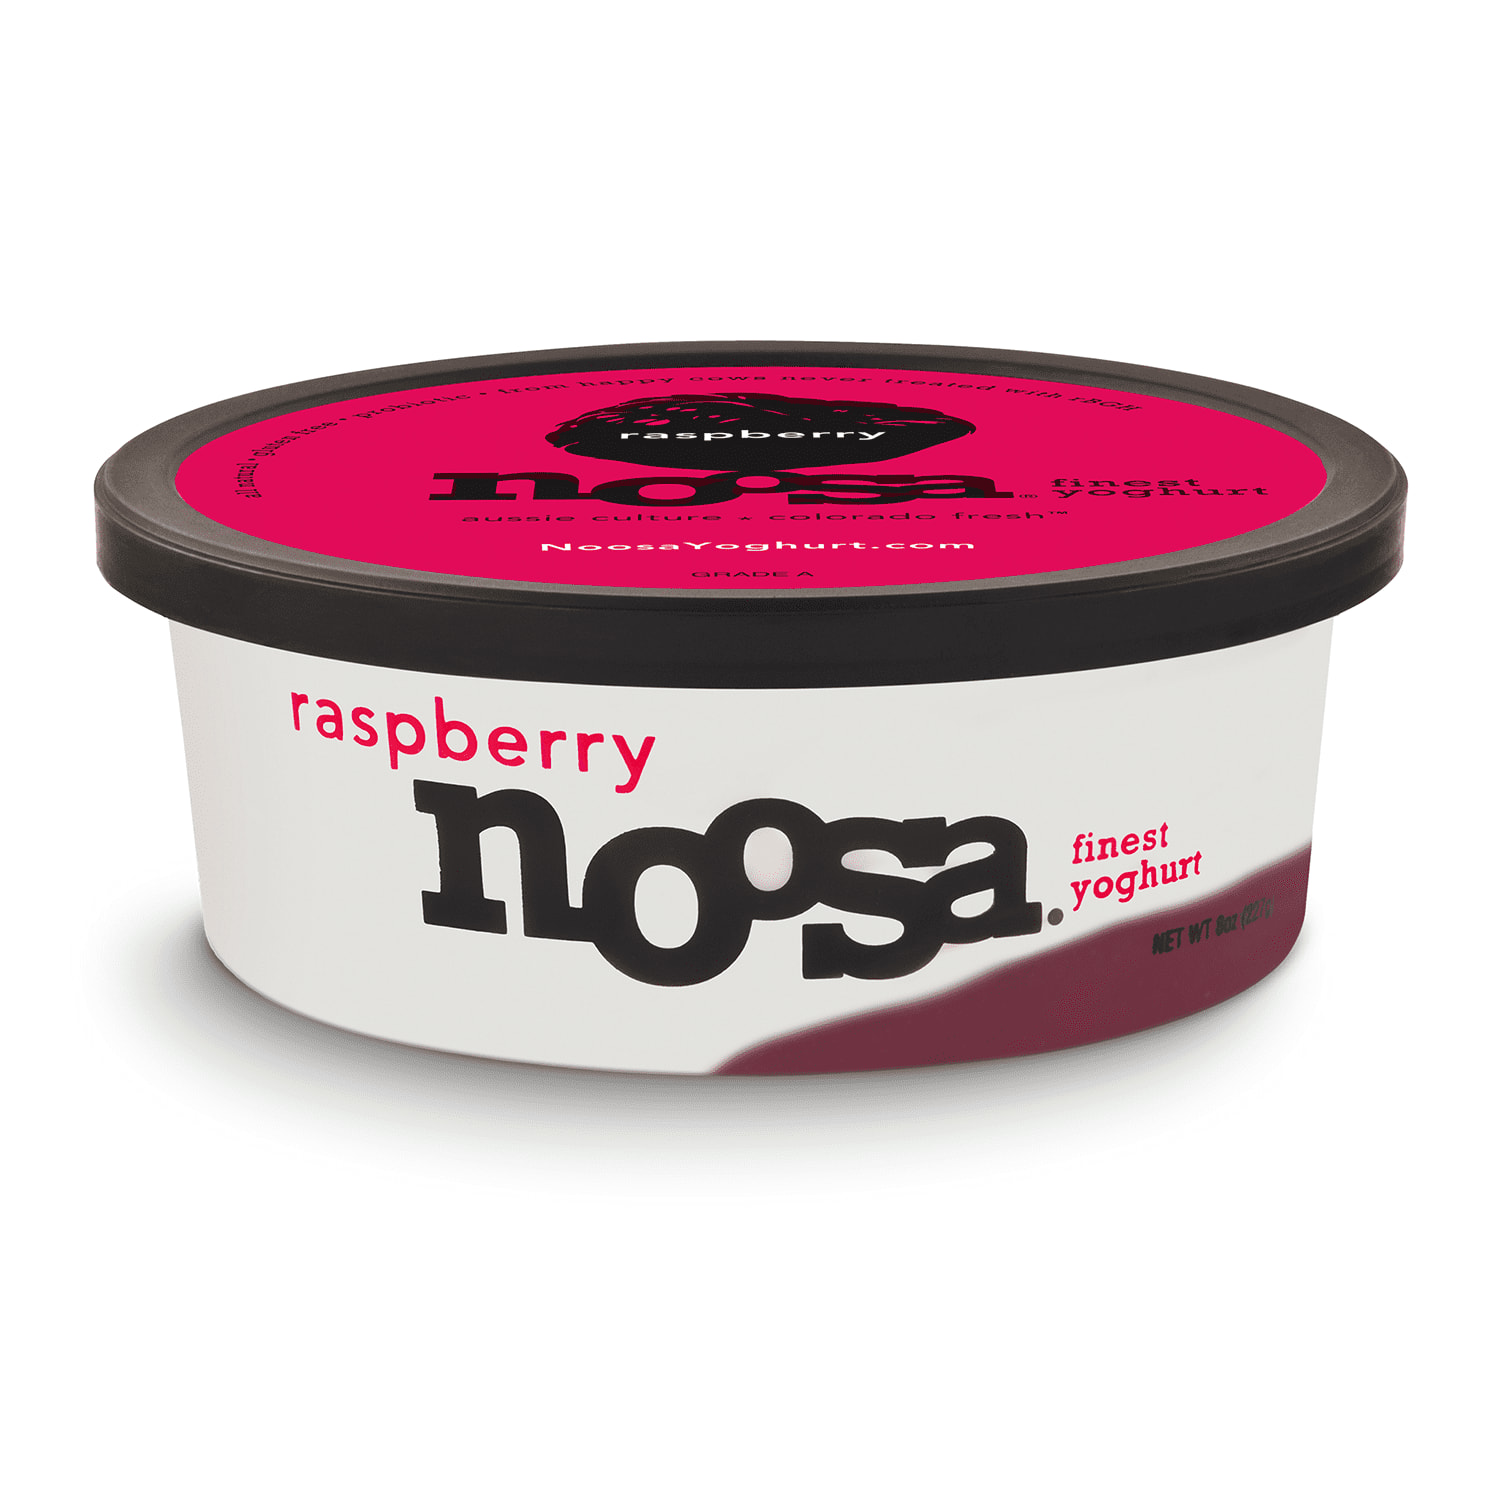 Noosa yogurt containers are the perfect serving size for my prep